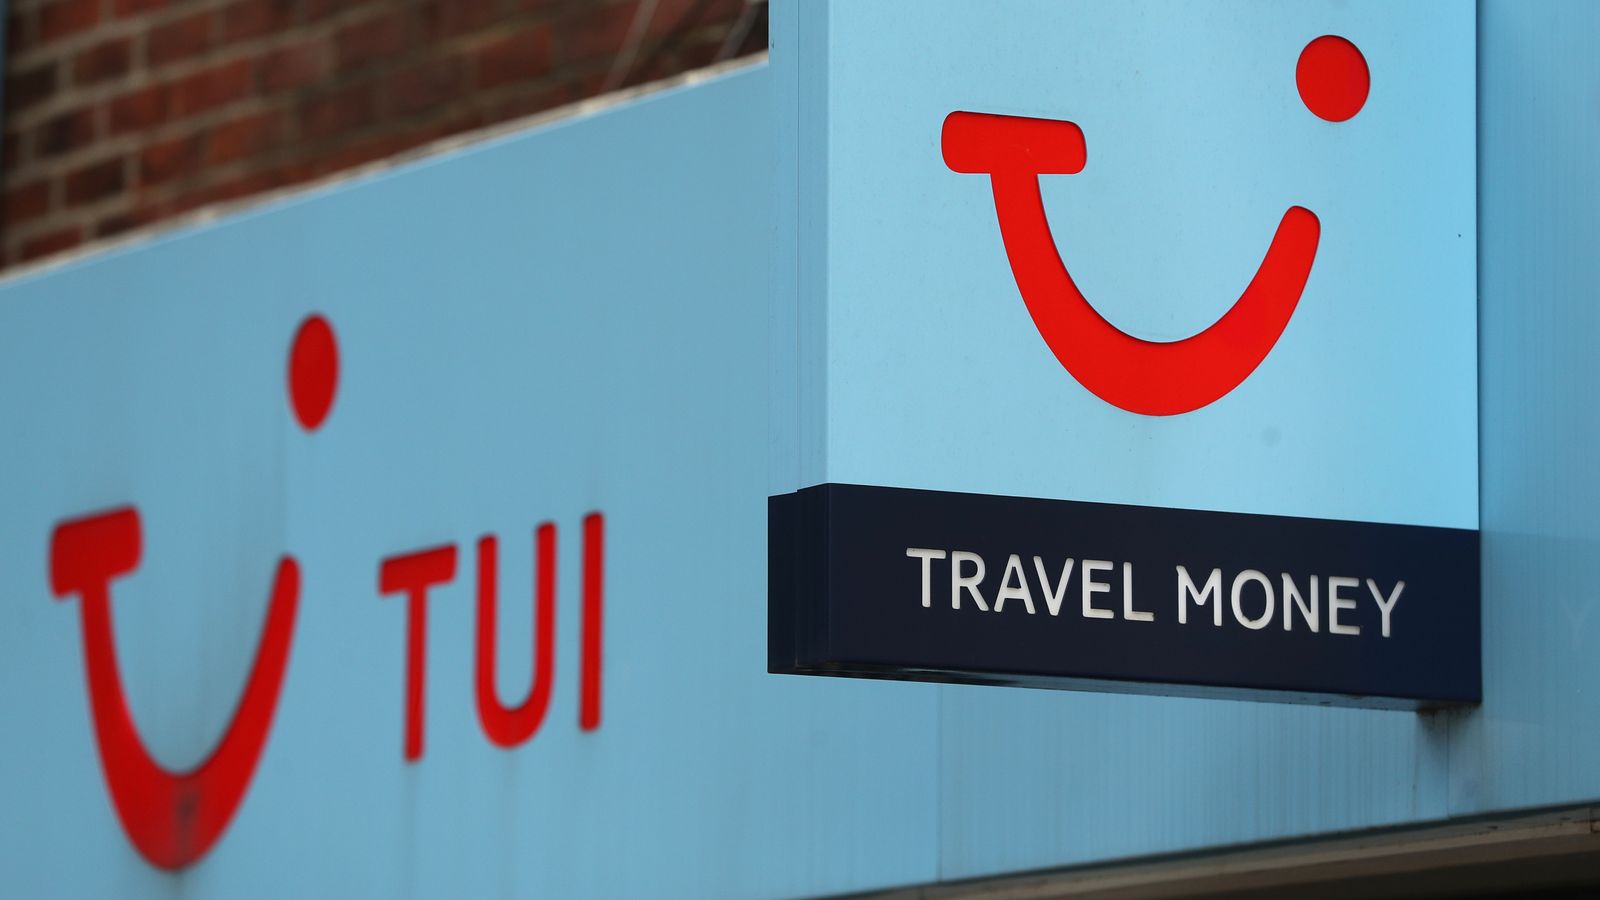 Tui's UK summer holiday sales return to pre-pandemic levels despite price hikes